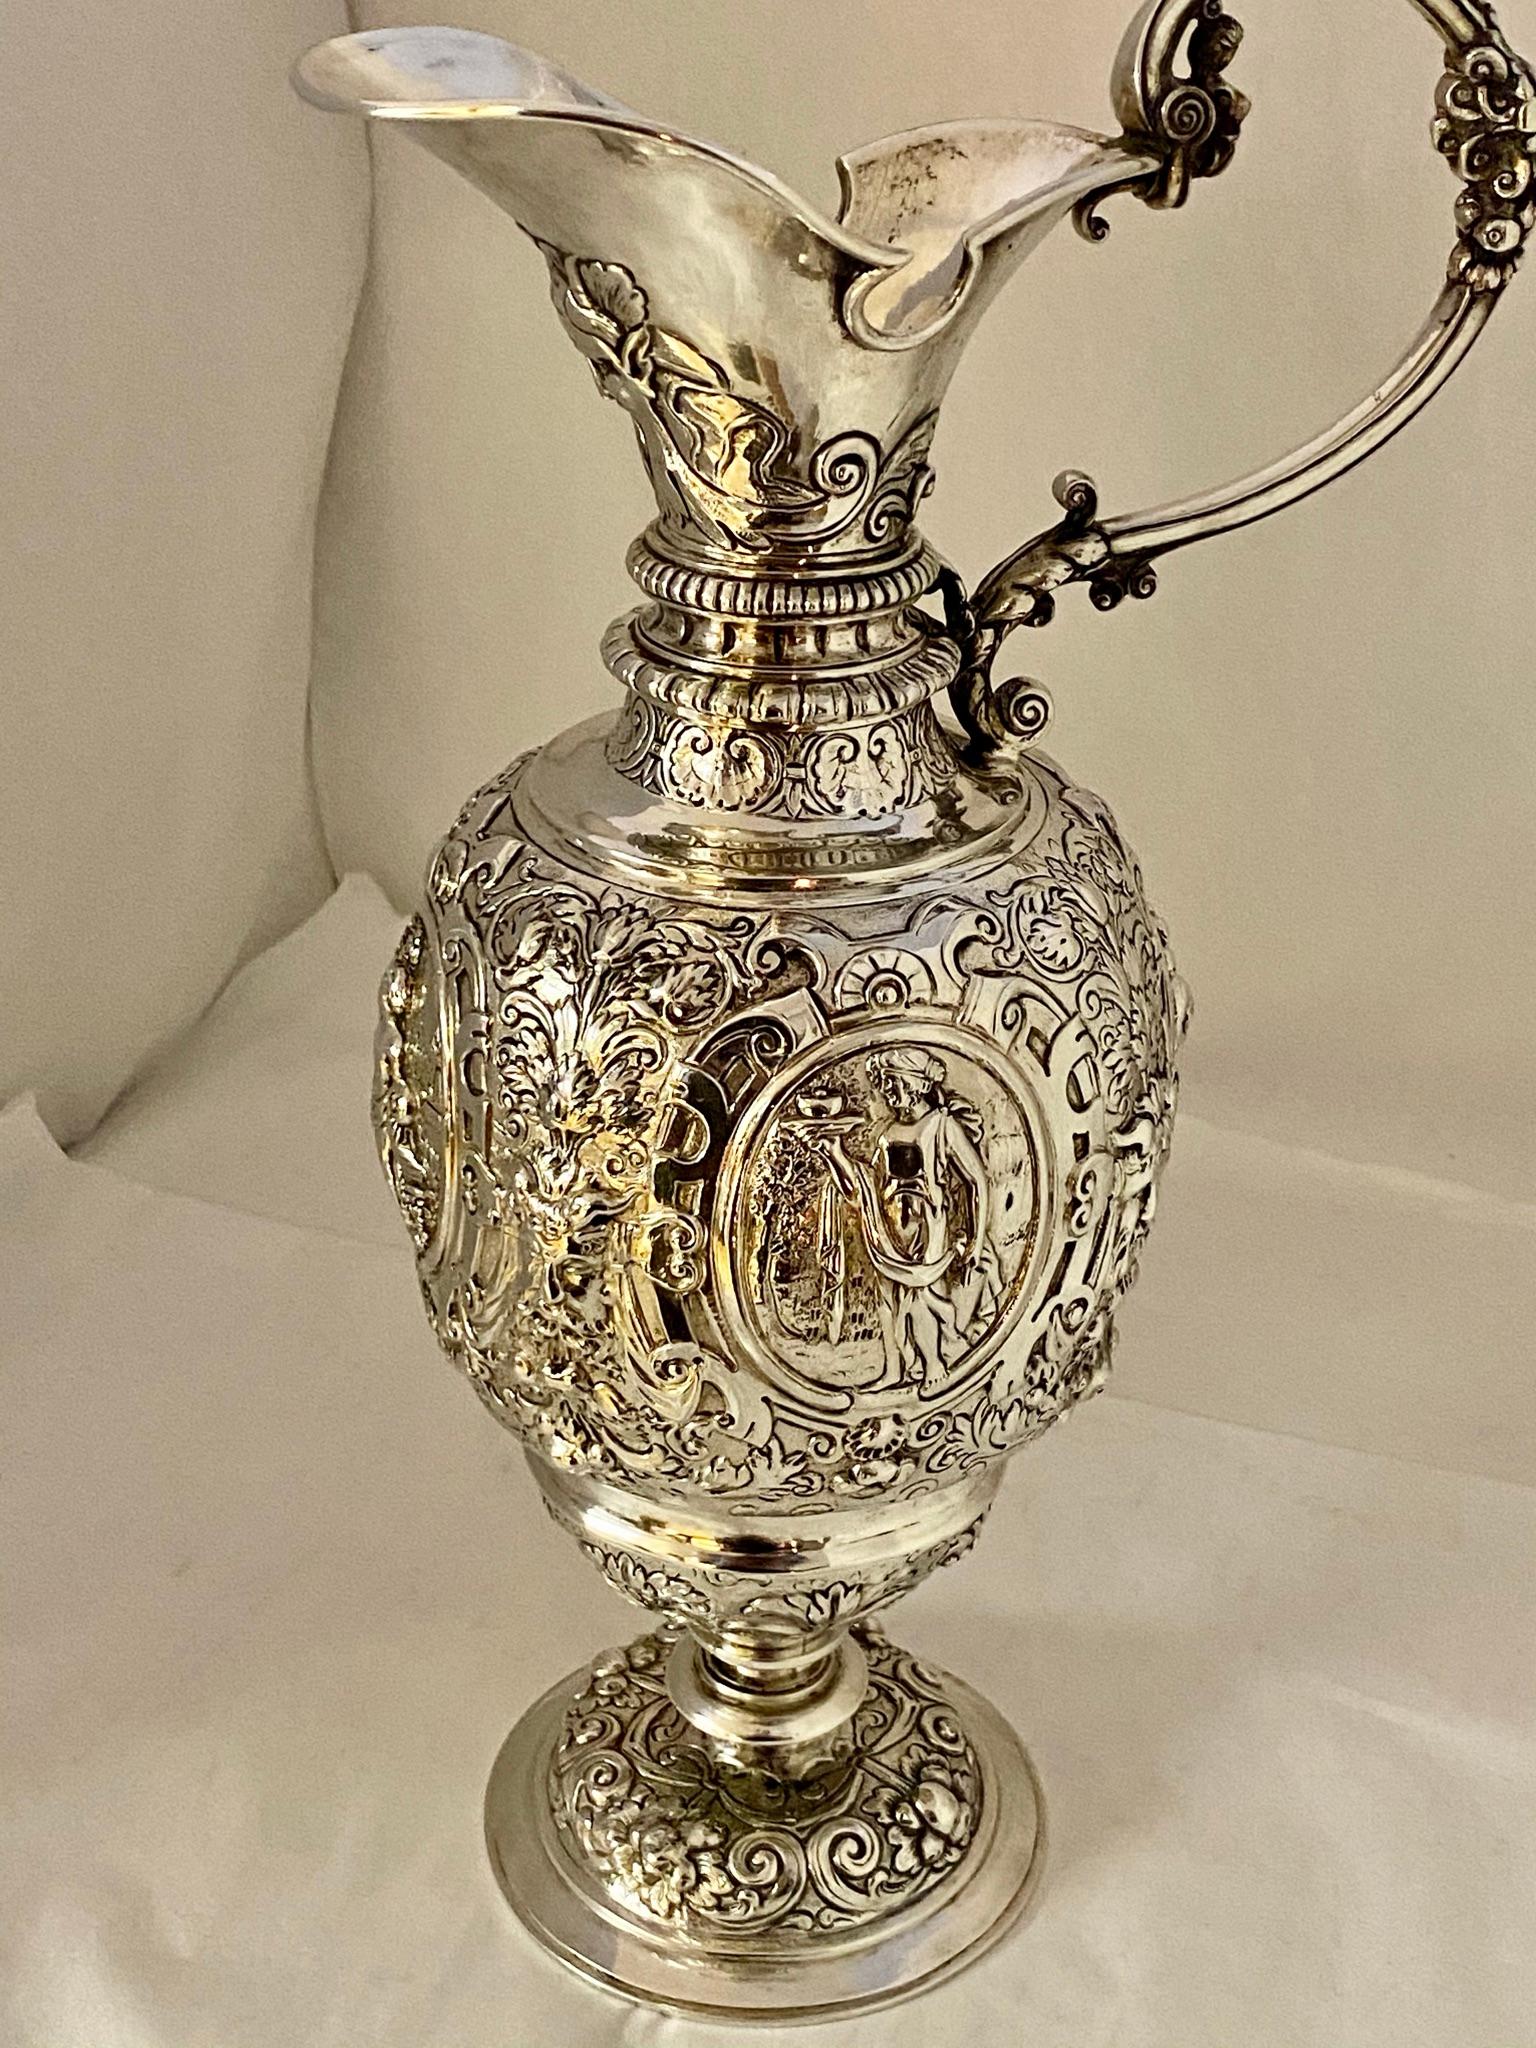 A silver Baroque pitcher,
Silver content 780/000 (12.5 Lötig)
Fully hand-hammered motifs of floral leaves and cartouches with mytholochic figures. (Copy after 16th century pitcher)
This technique was a specialty of silver smiths from Hanau (near